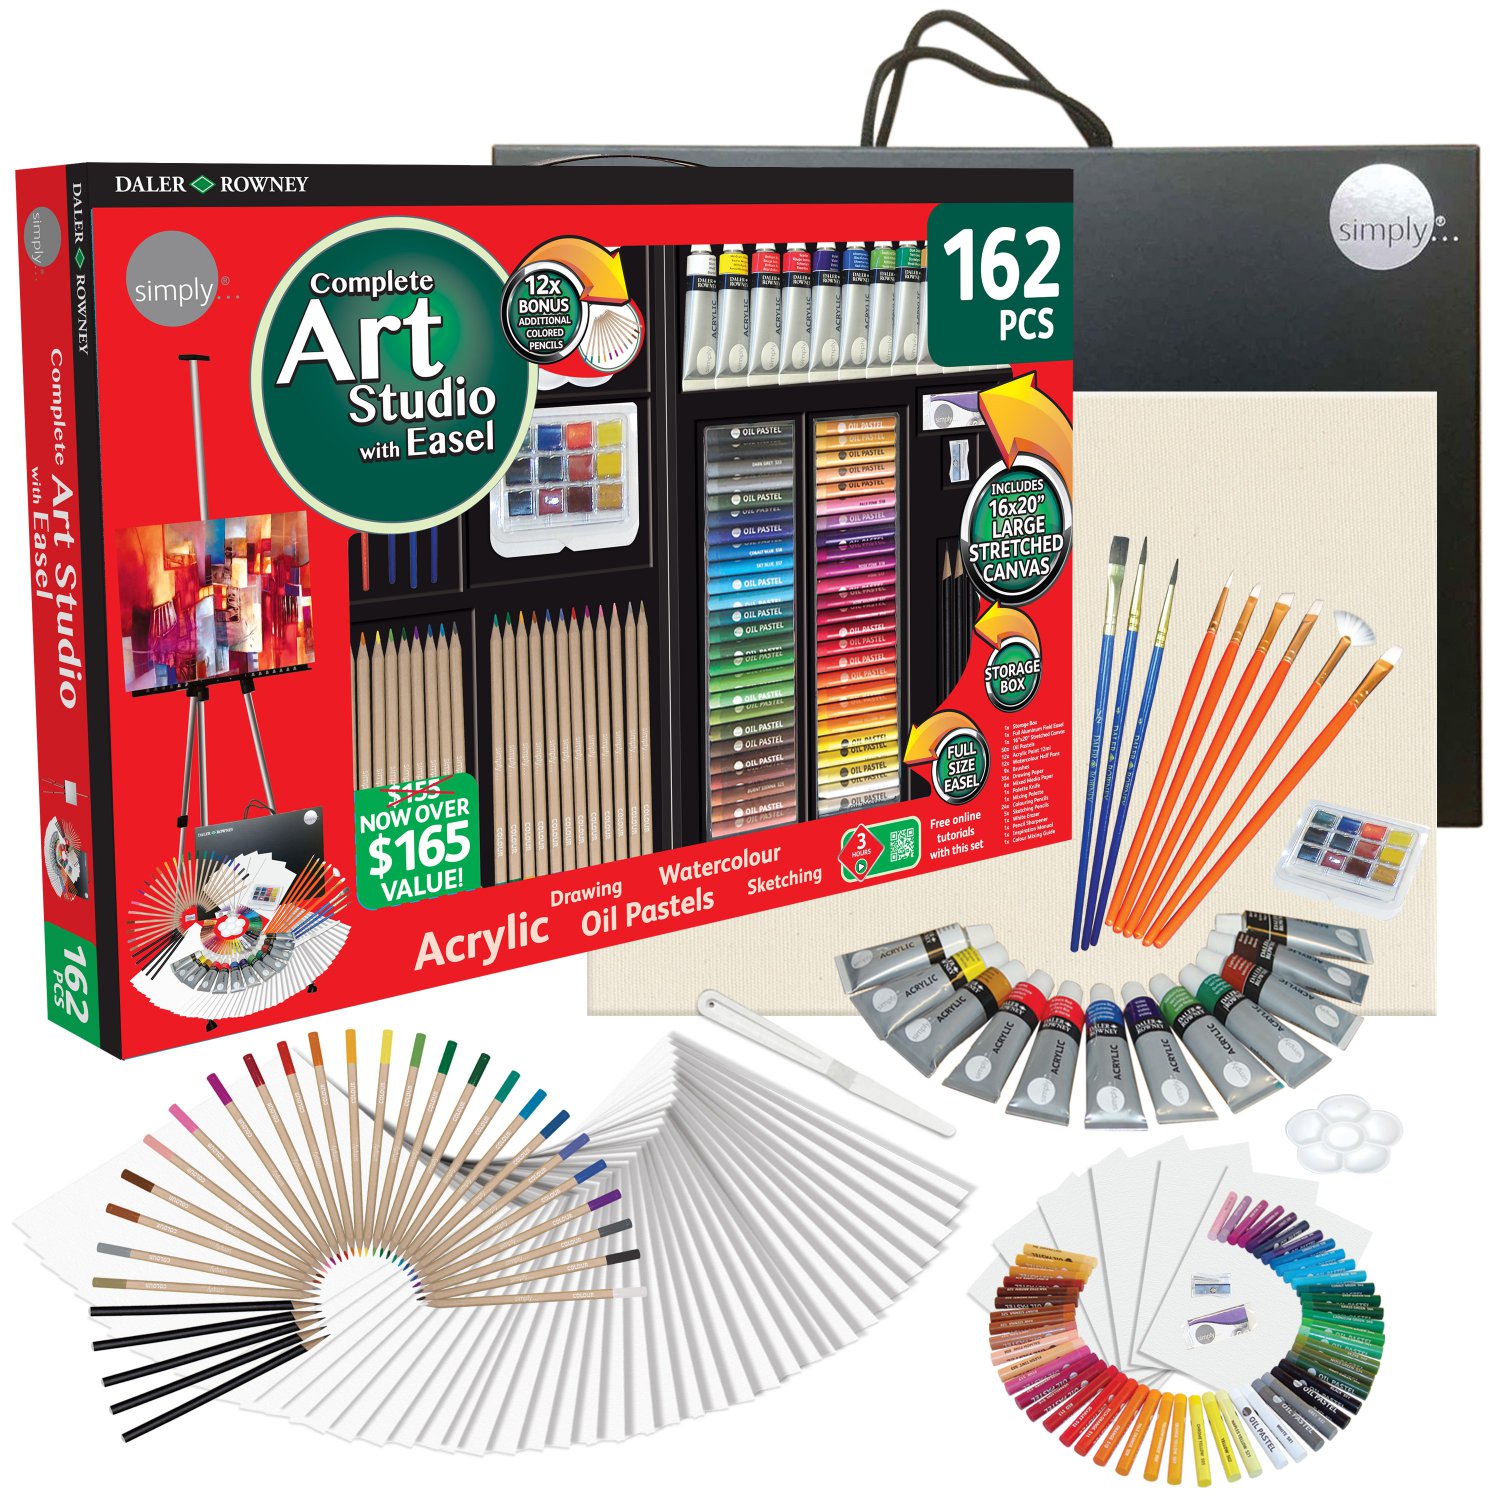 Art Easel Studio Set - DALER ROWNEY - Technical Mix - 115 Piece - With  Stand 